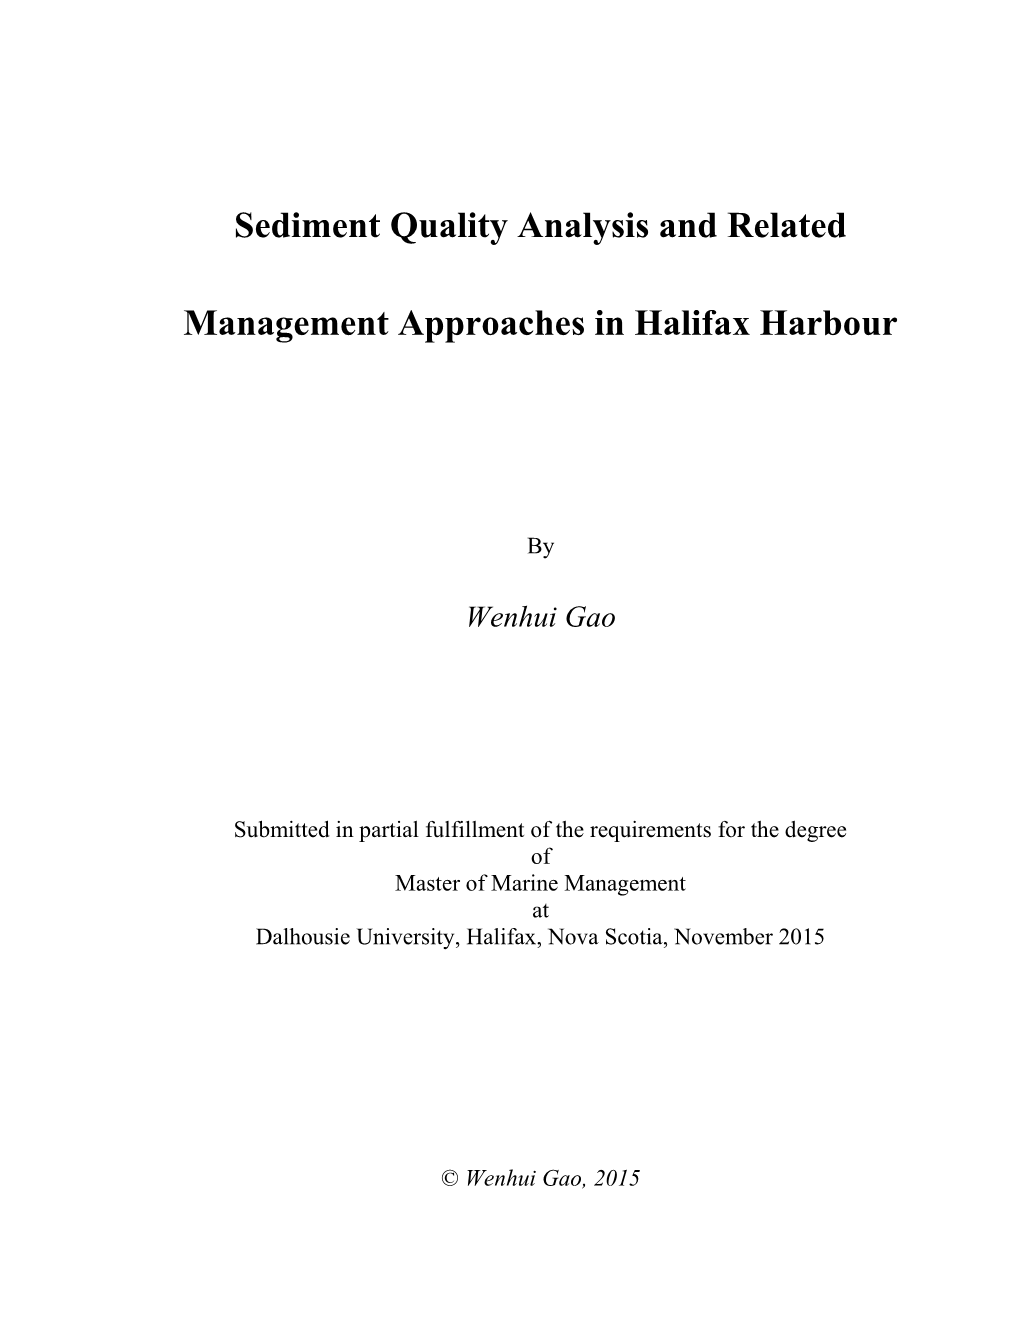 Sediment Quality Analysis and Related Management Approaches in Hali- Fax Harbour